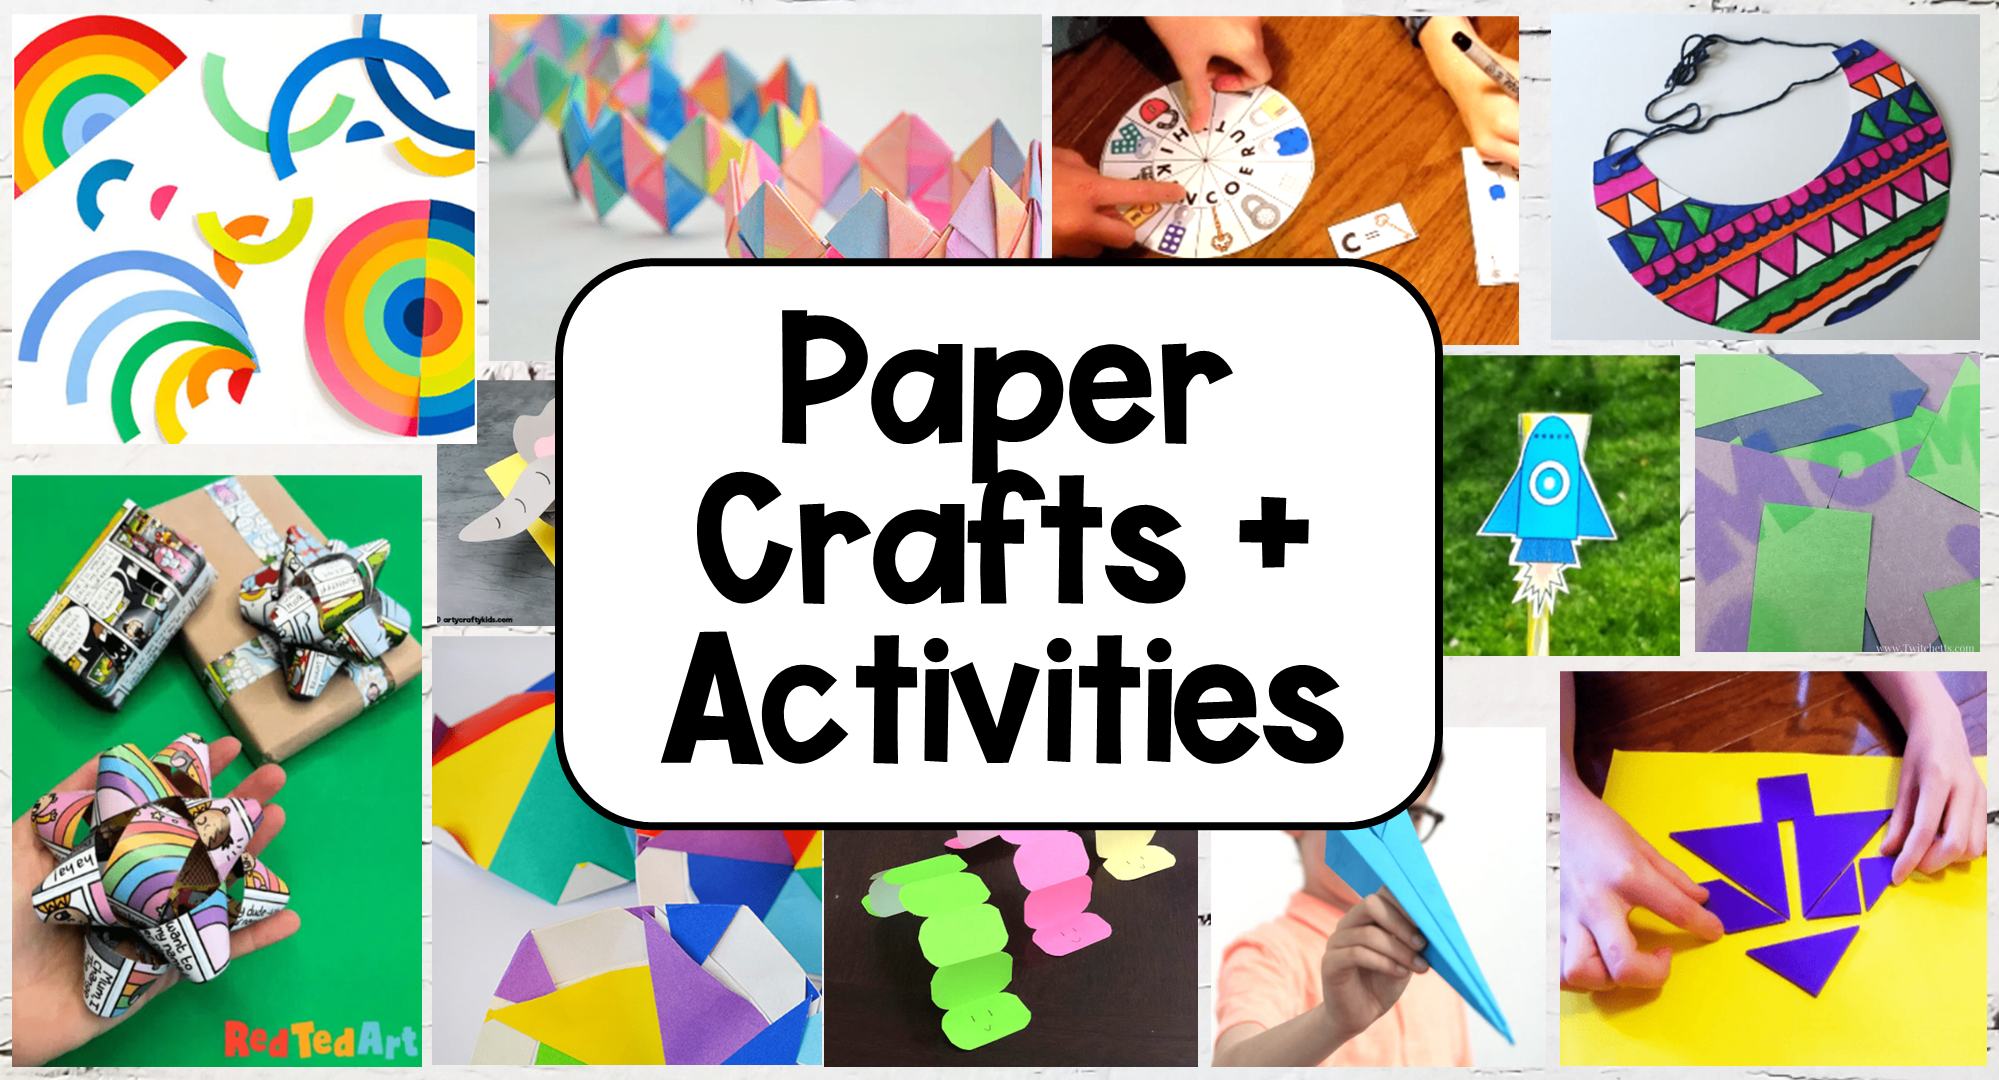 Easy Paper Pineapple Craft for Kids - Taming Little Monsters